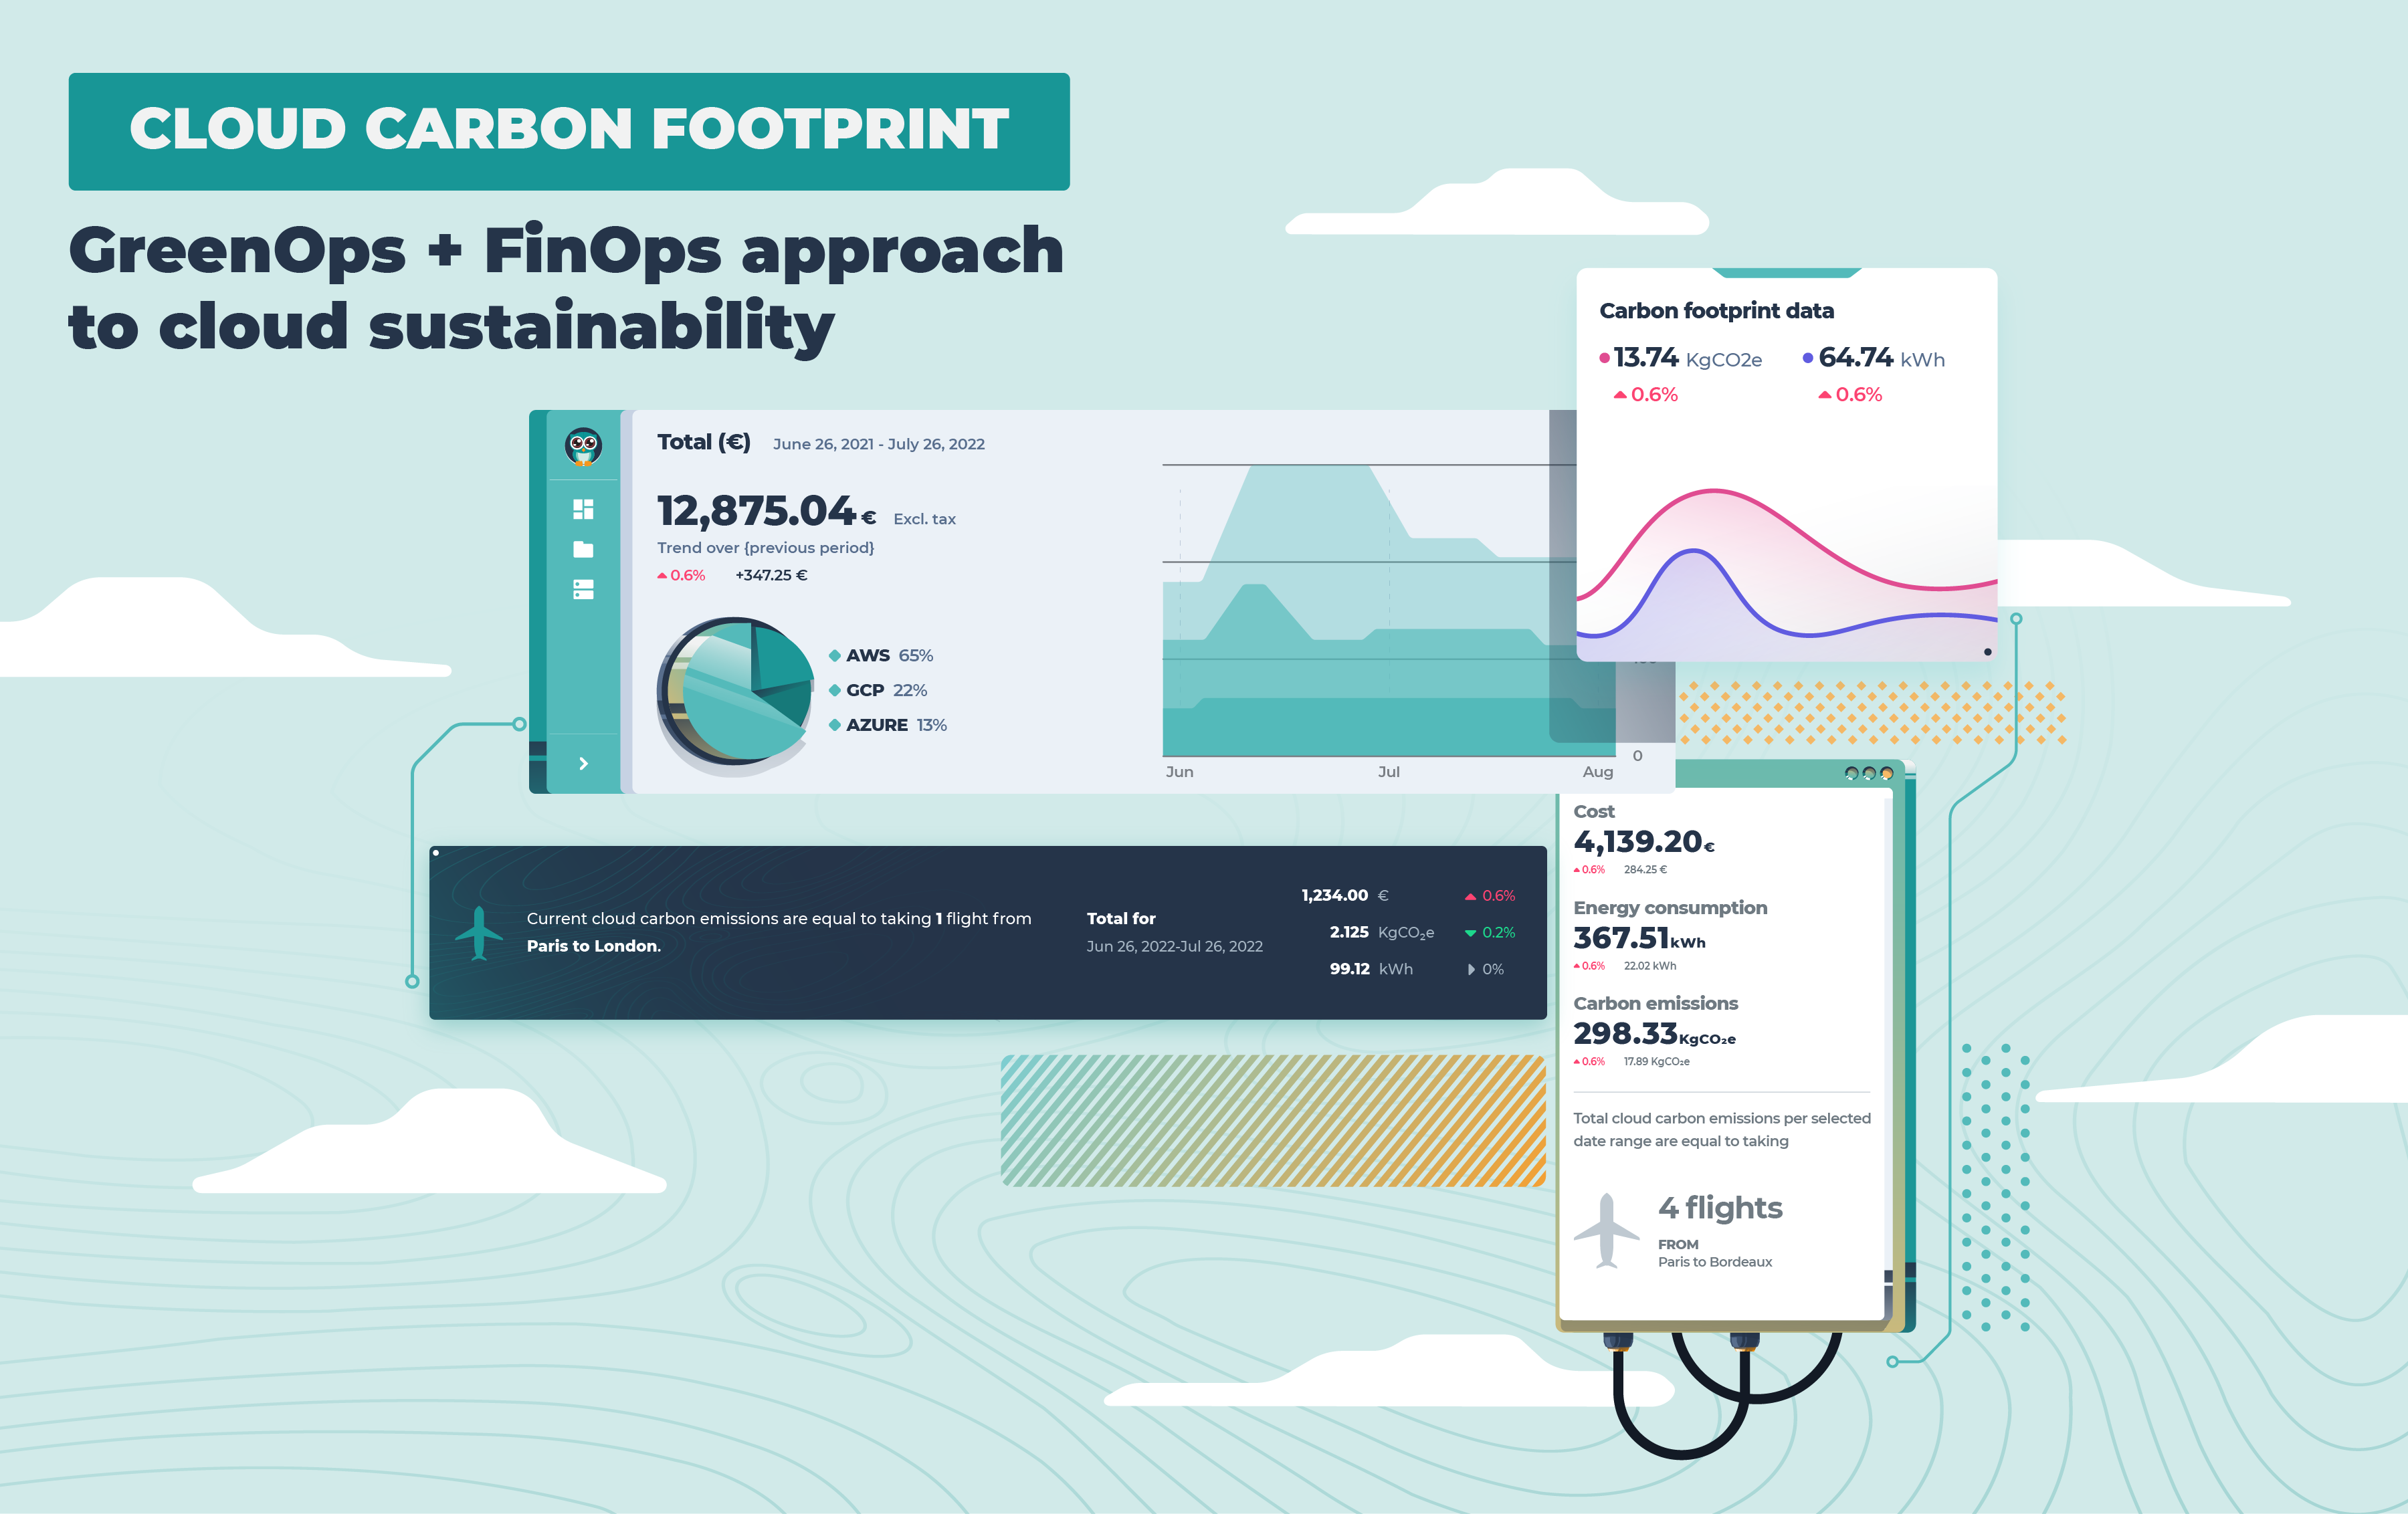 Cloud Carbon Footprint: a GreenOps + FinOps approach to cloud waste